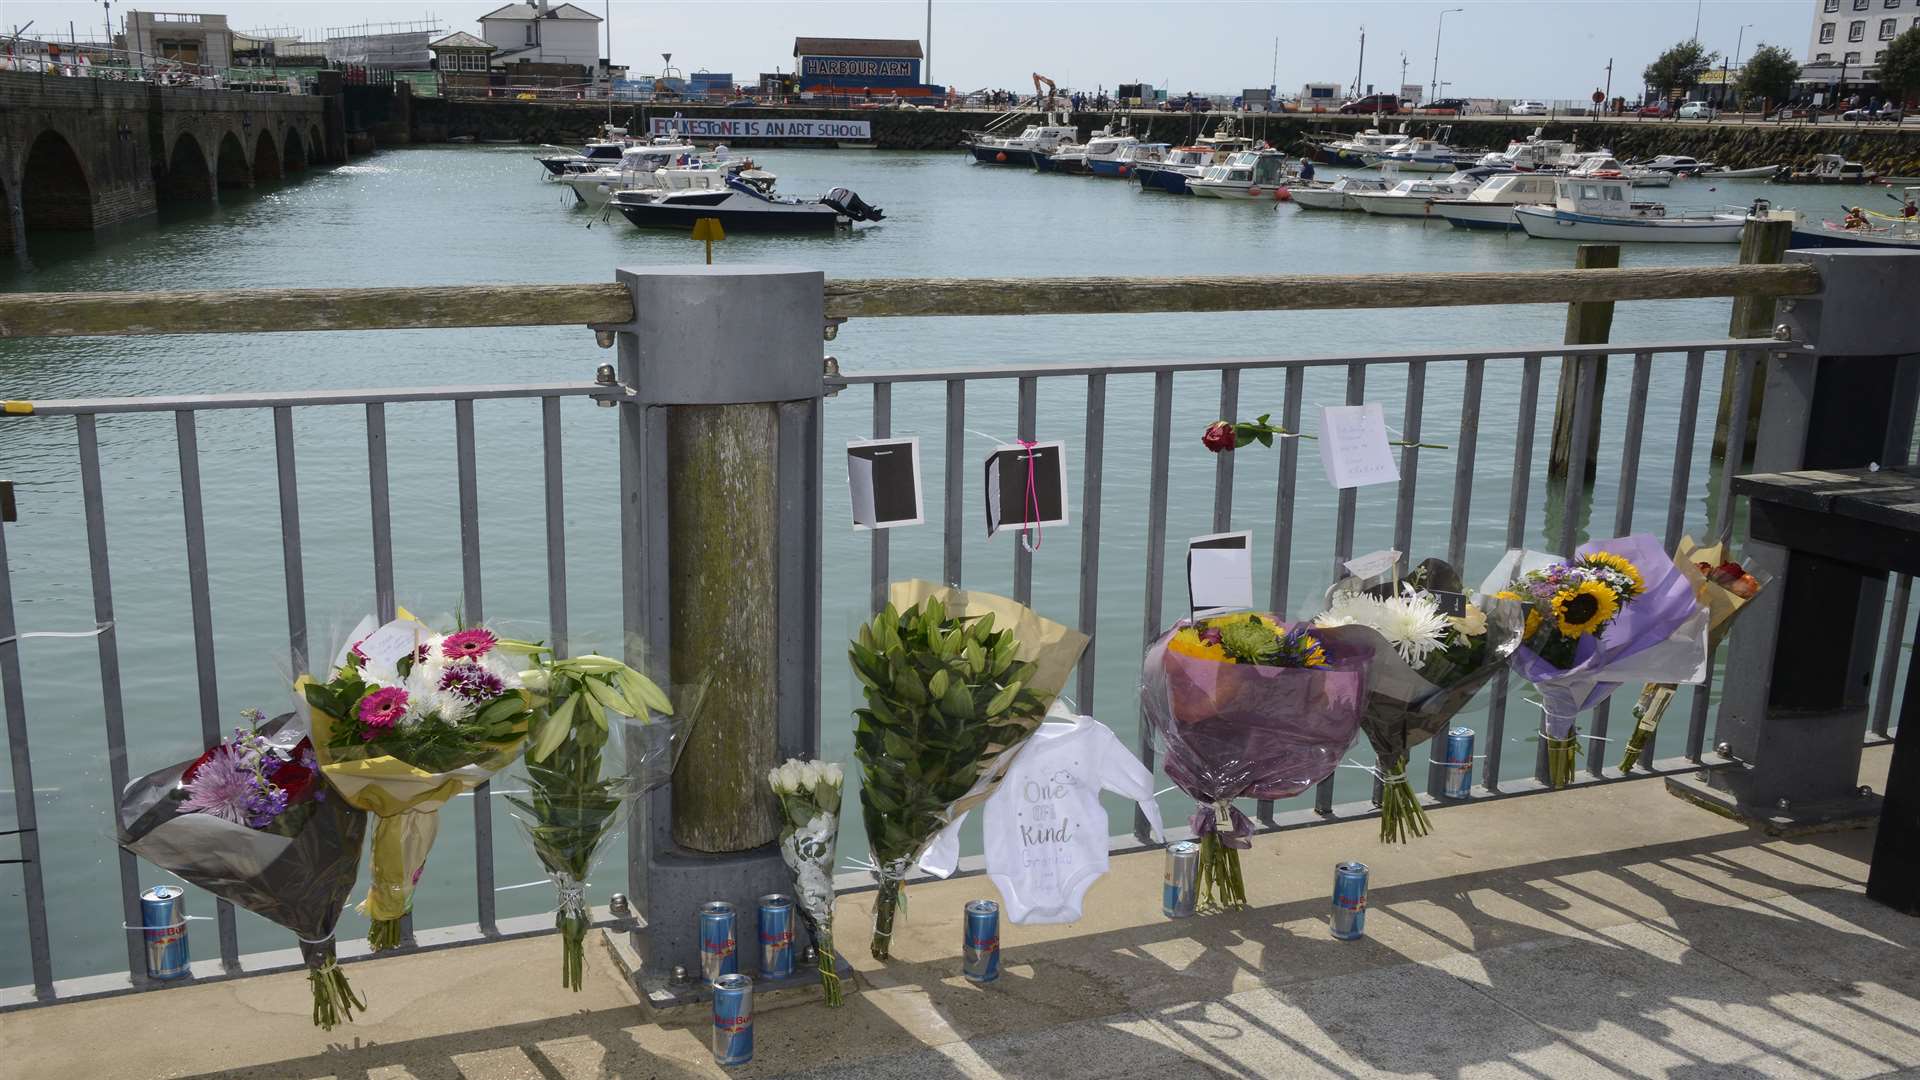 Floral tributes were left to Steve Holton at the scene